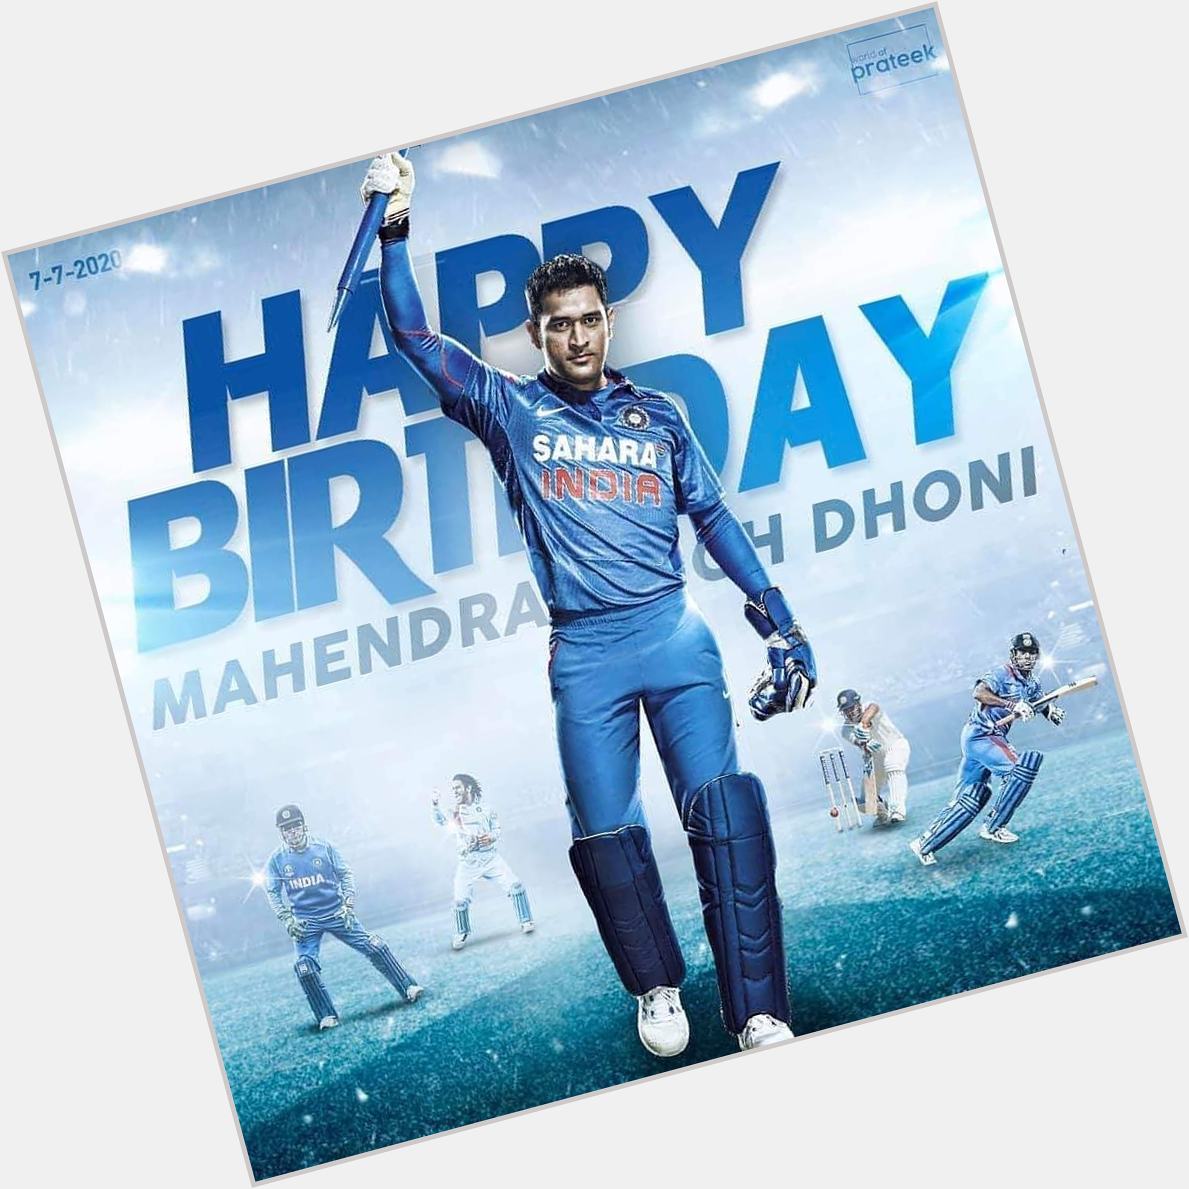 Happy Birthday to Mahendra Singh Dhoni, the great former captain of the Indian team 